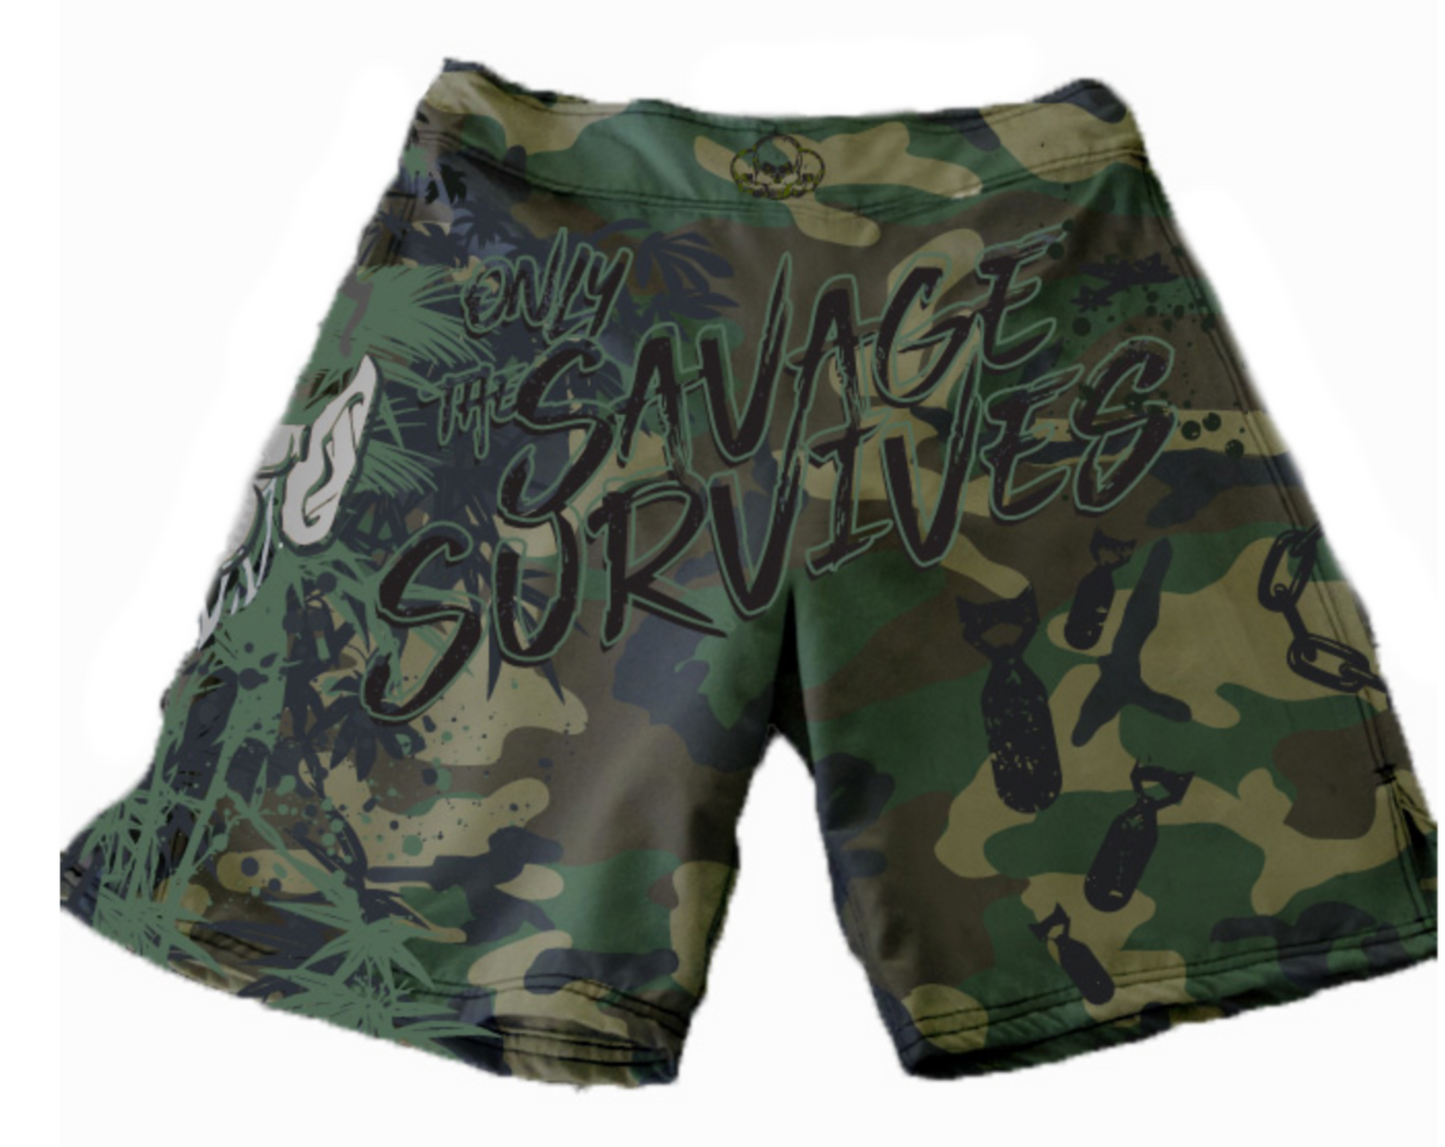 Camo Monkey Long Rash Guard And Shorts Package Presale items Shipping To  Start December 5th Savage Fightwear